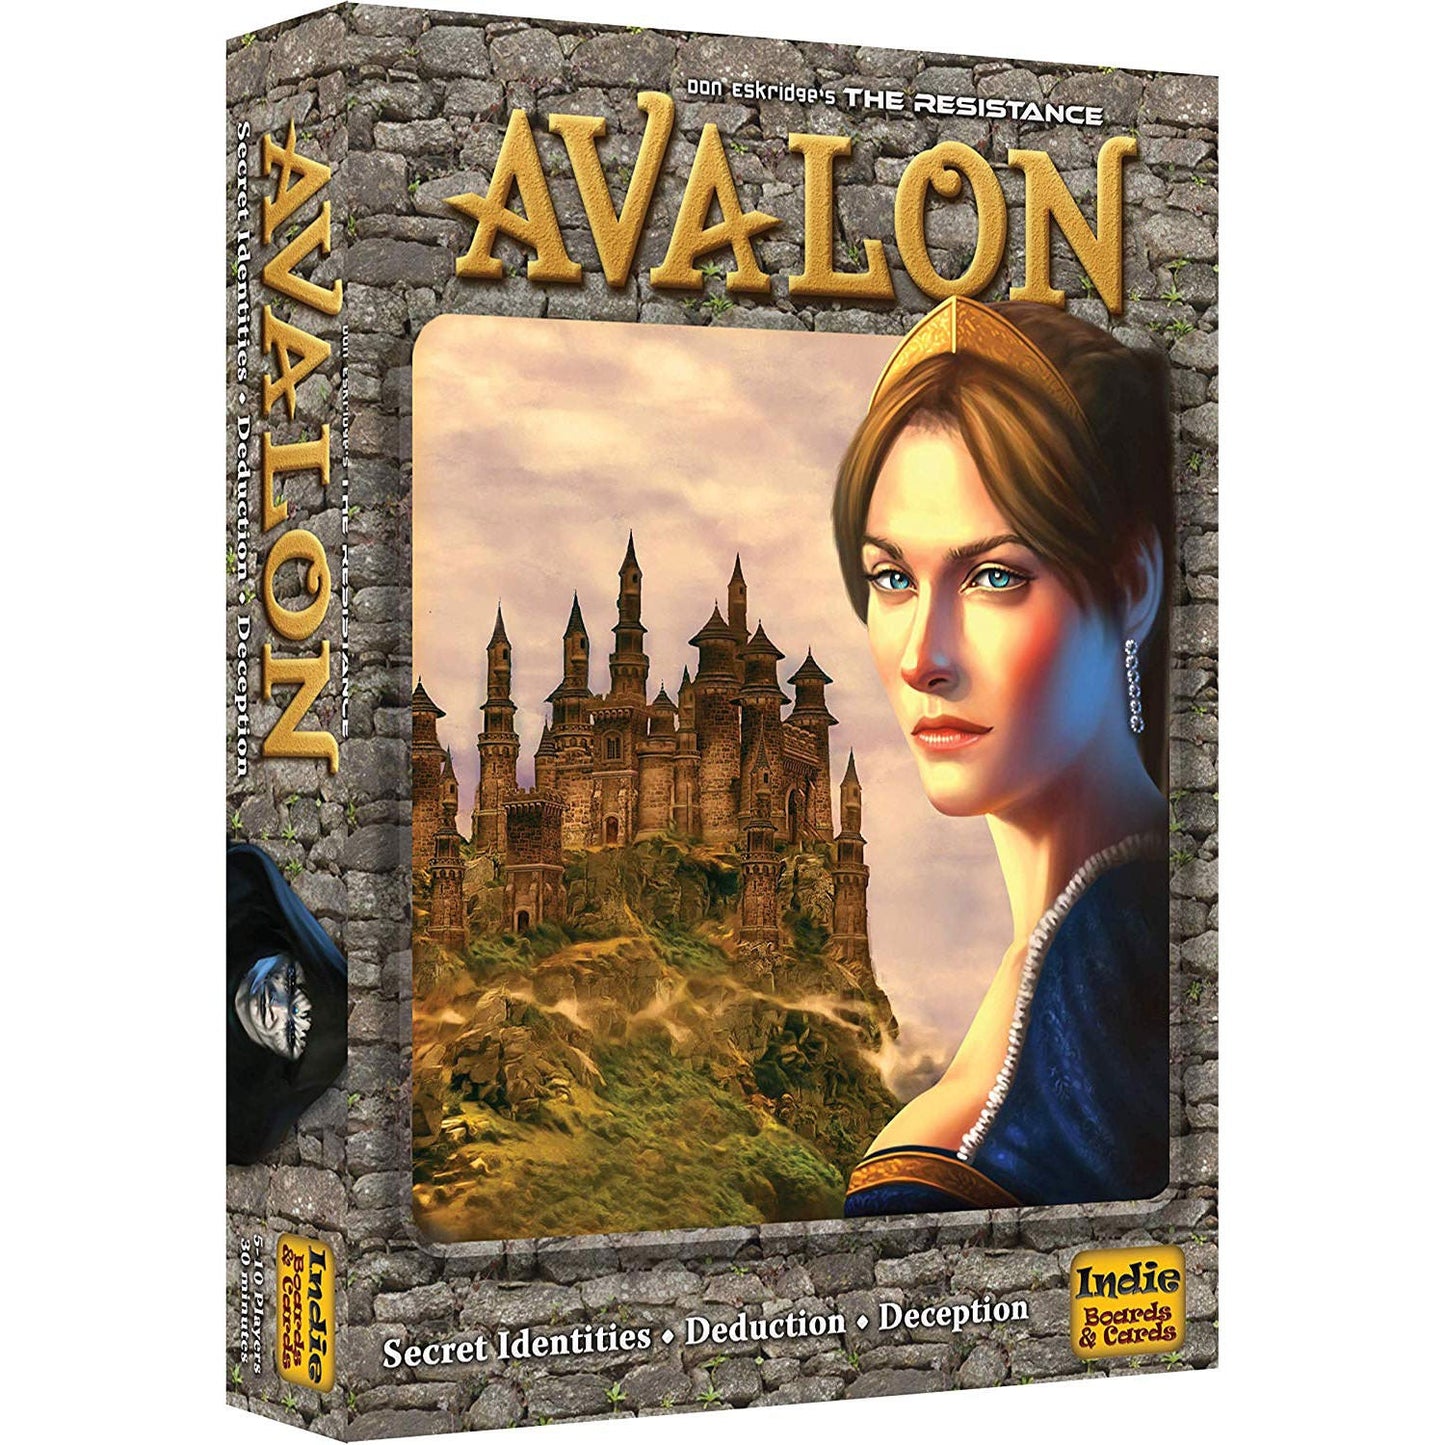 The Resistance: Avalon from Indie Boards & Cards at The Compleat Strategist